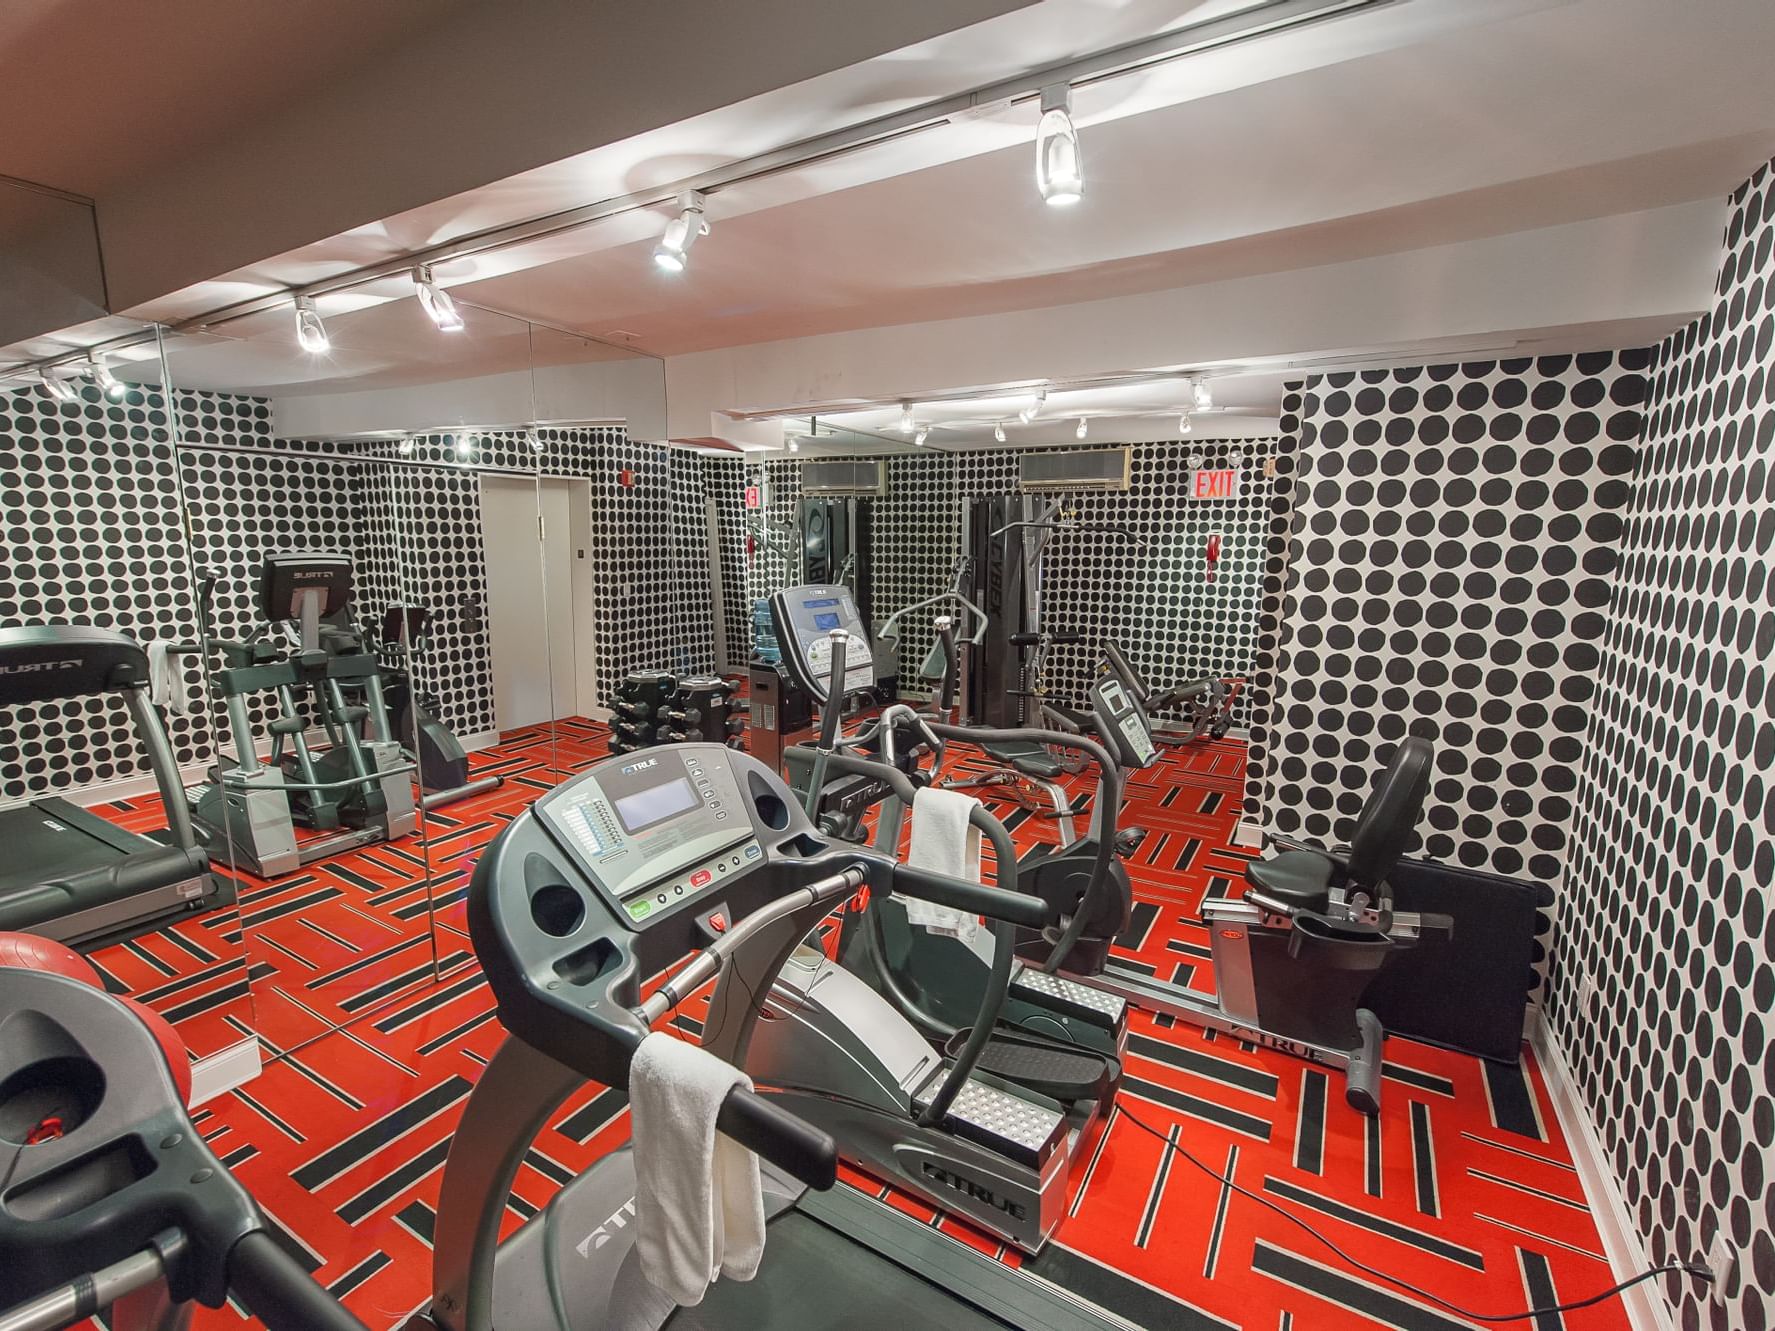 Workout equipment inside a hotel gym